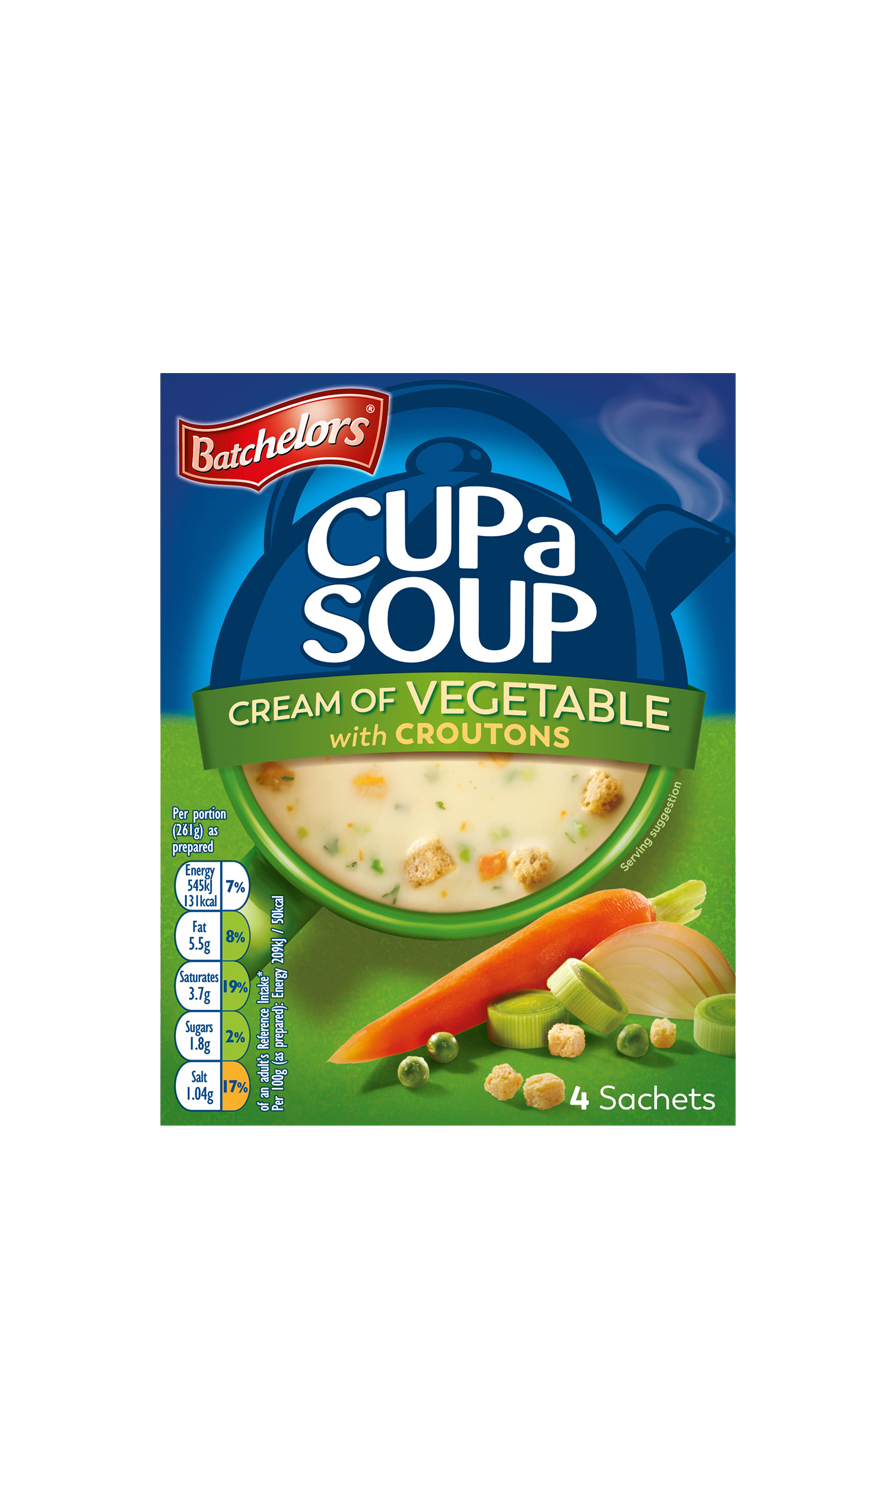 Batchelors Cup a Soup Cream of Vegetable with Croutons 122g